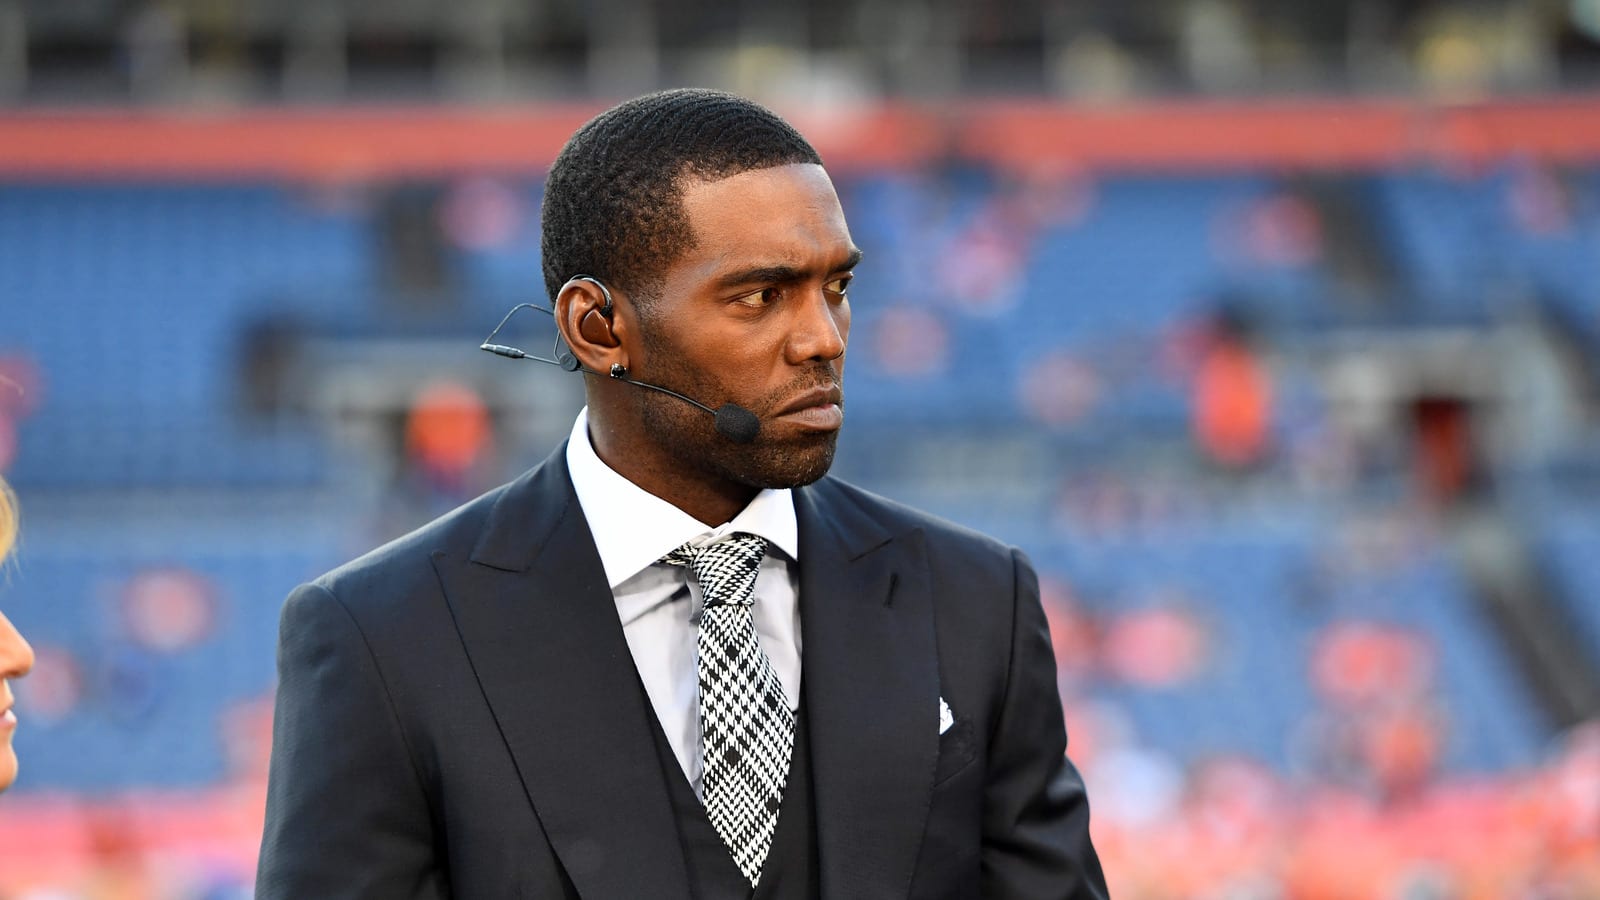 Randy Moss' ex-girlfriend responds to his drug accusations